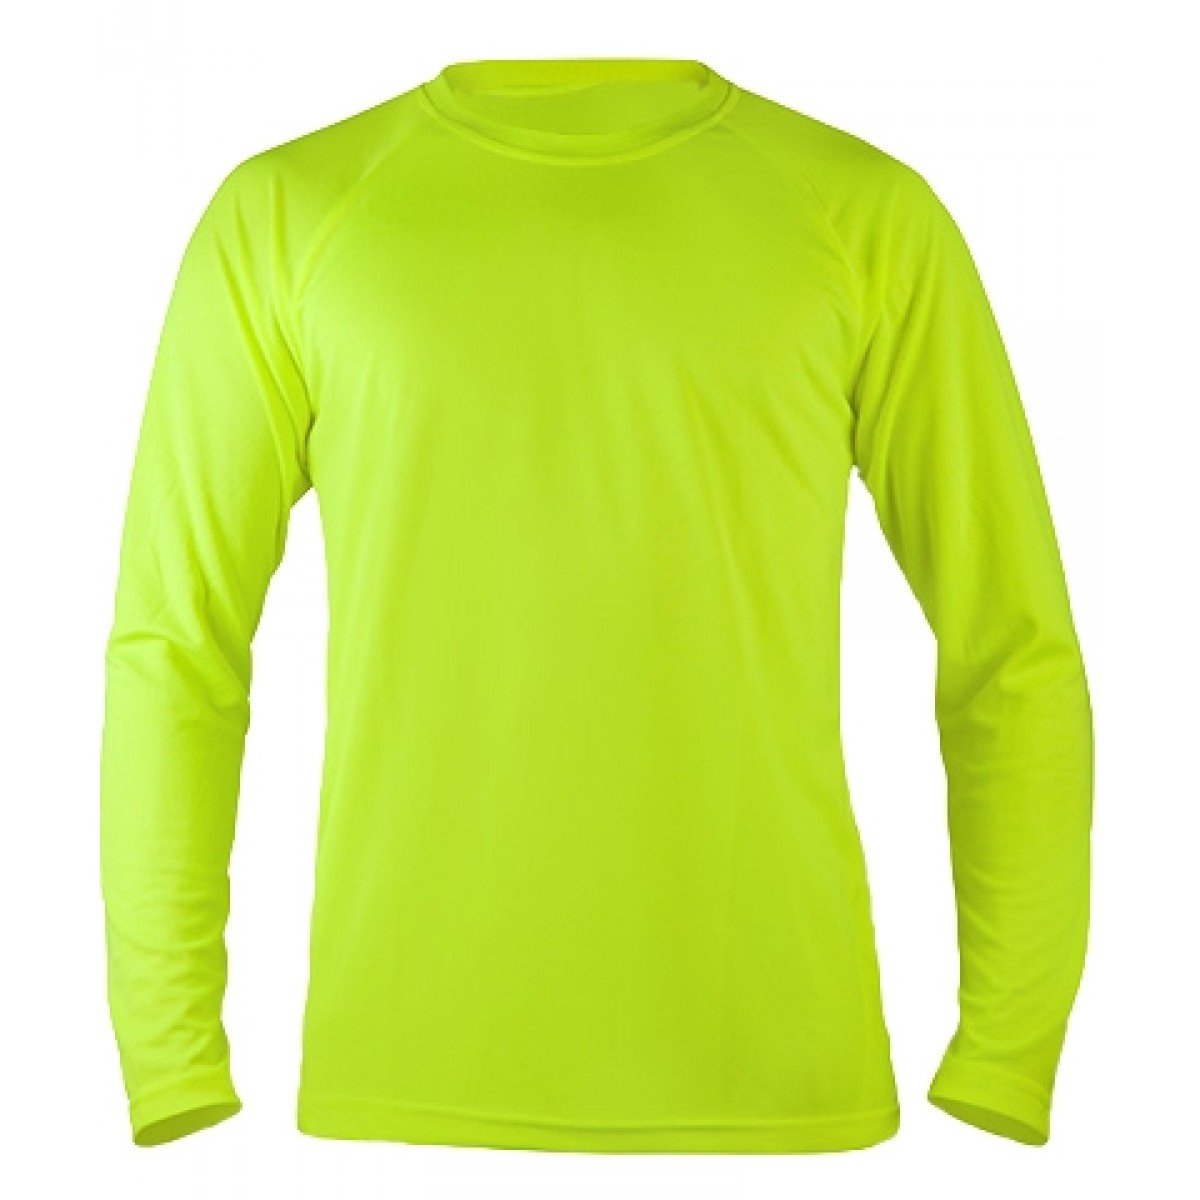 Long Sleeve Performance Tee / Safety Green-Safety Green-M